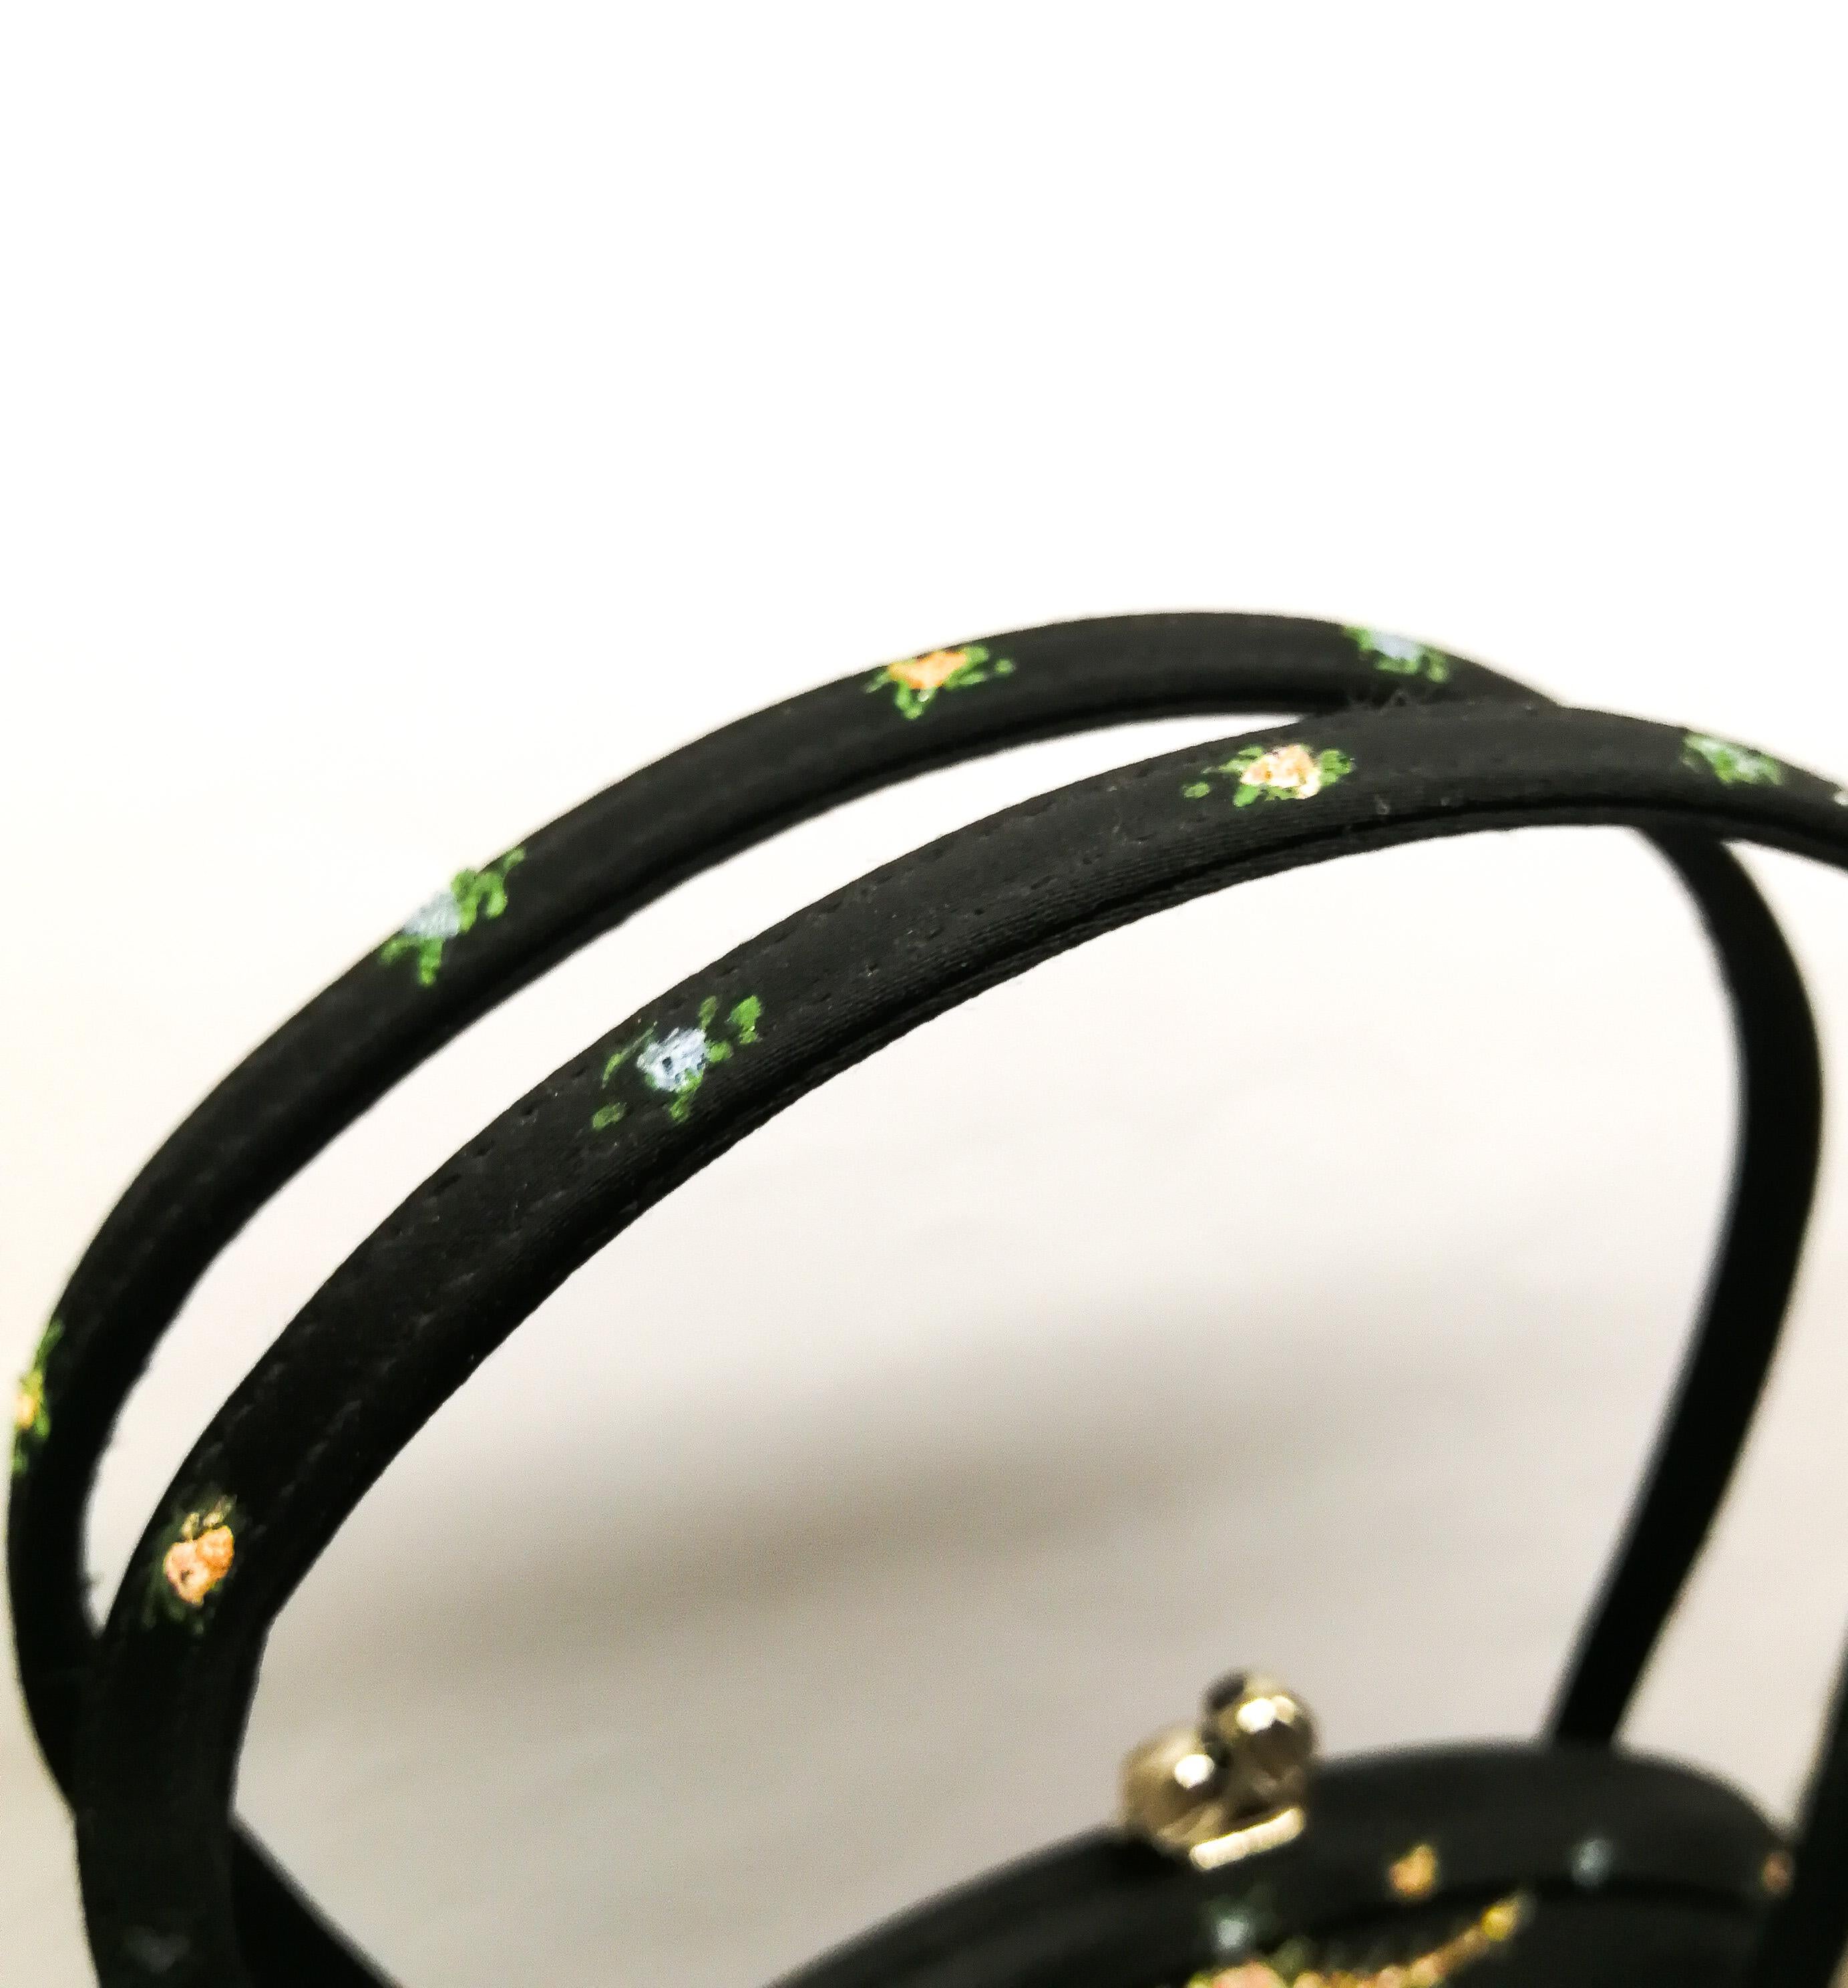 Black A black silk and glass hand painted floral design handbag, Waldybags, UK, 1950s